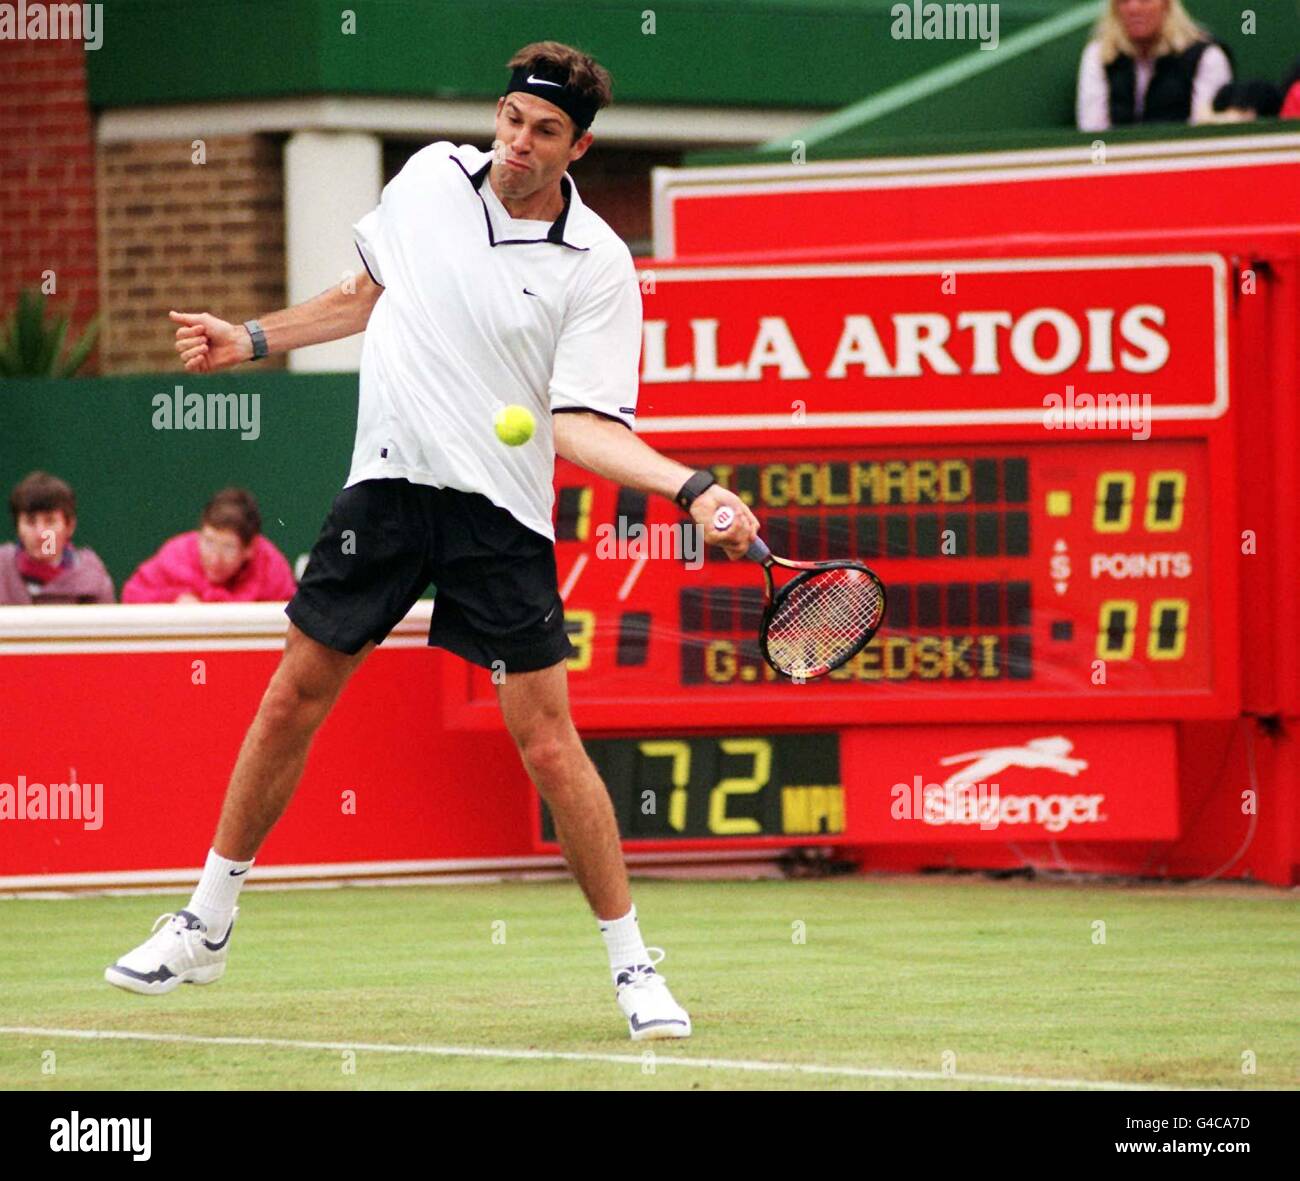 England's Greg Rusedski returns the serv of Golmaro during their rain interrupted second set in the Stella Artois Championships at London's Queens Club today (Thursday). Photo by Paul Treacy/PA. Stock Photo